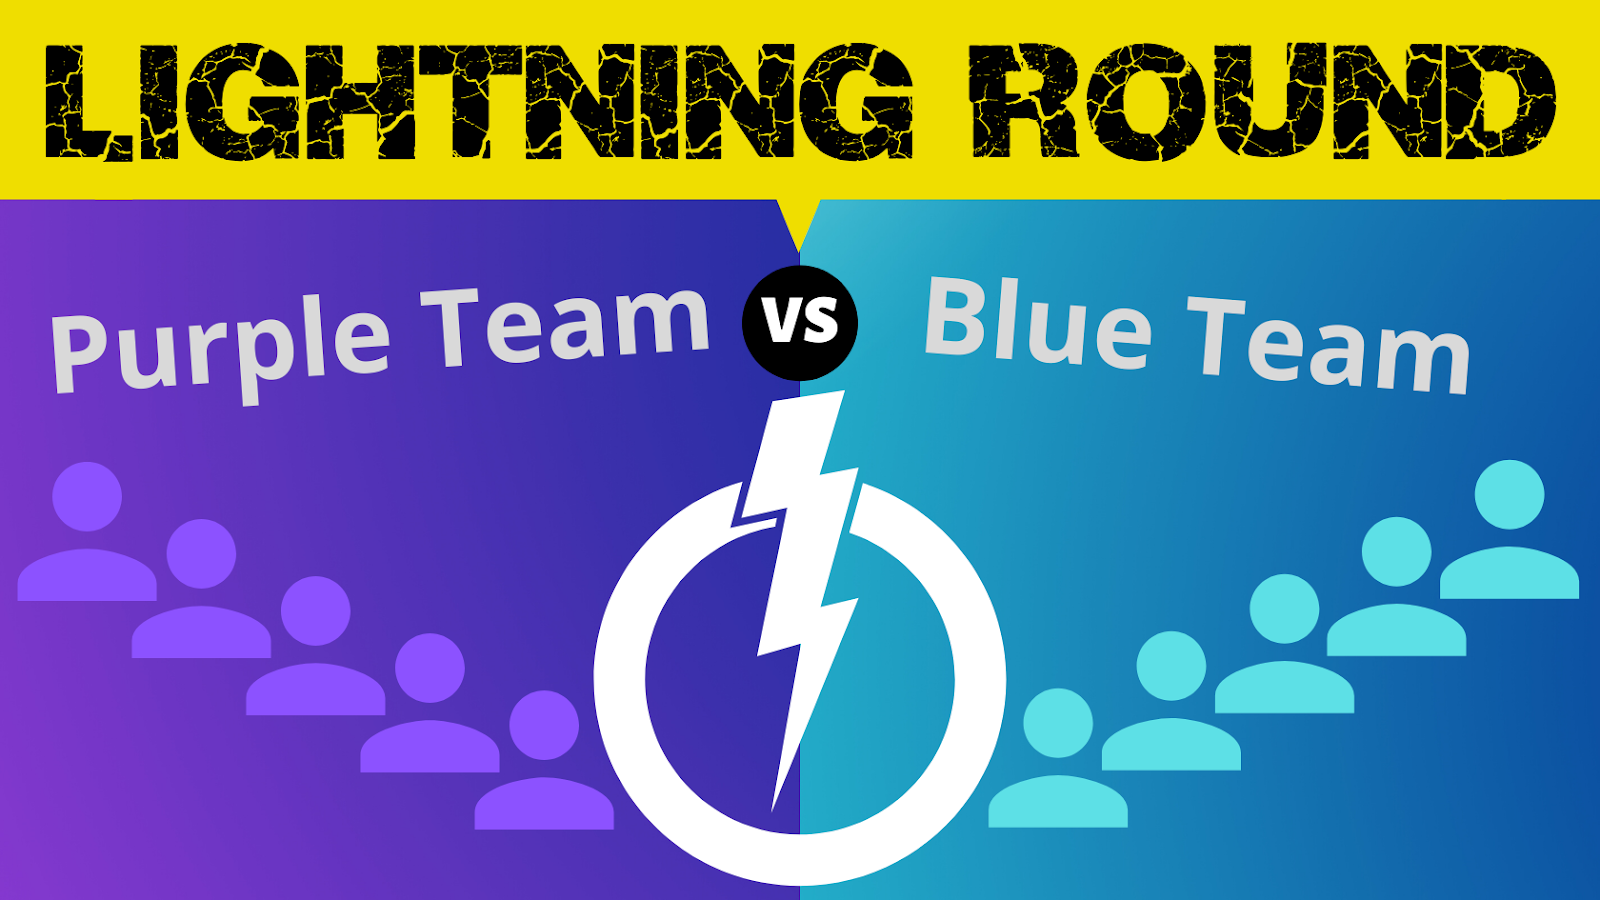 Text: Lightning Round (written in black lightning font on yellow background). Purple background on the left and blue background on the right. Text: Purple team vs. Blue team. Image of five players on each side. Image of a white lightning bolt with a circle around it in the middle.